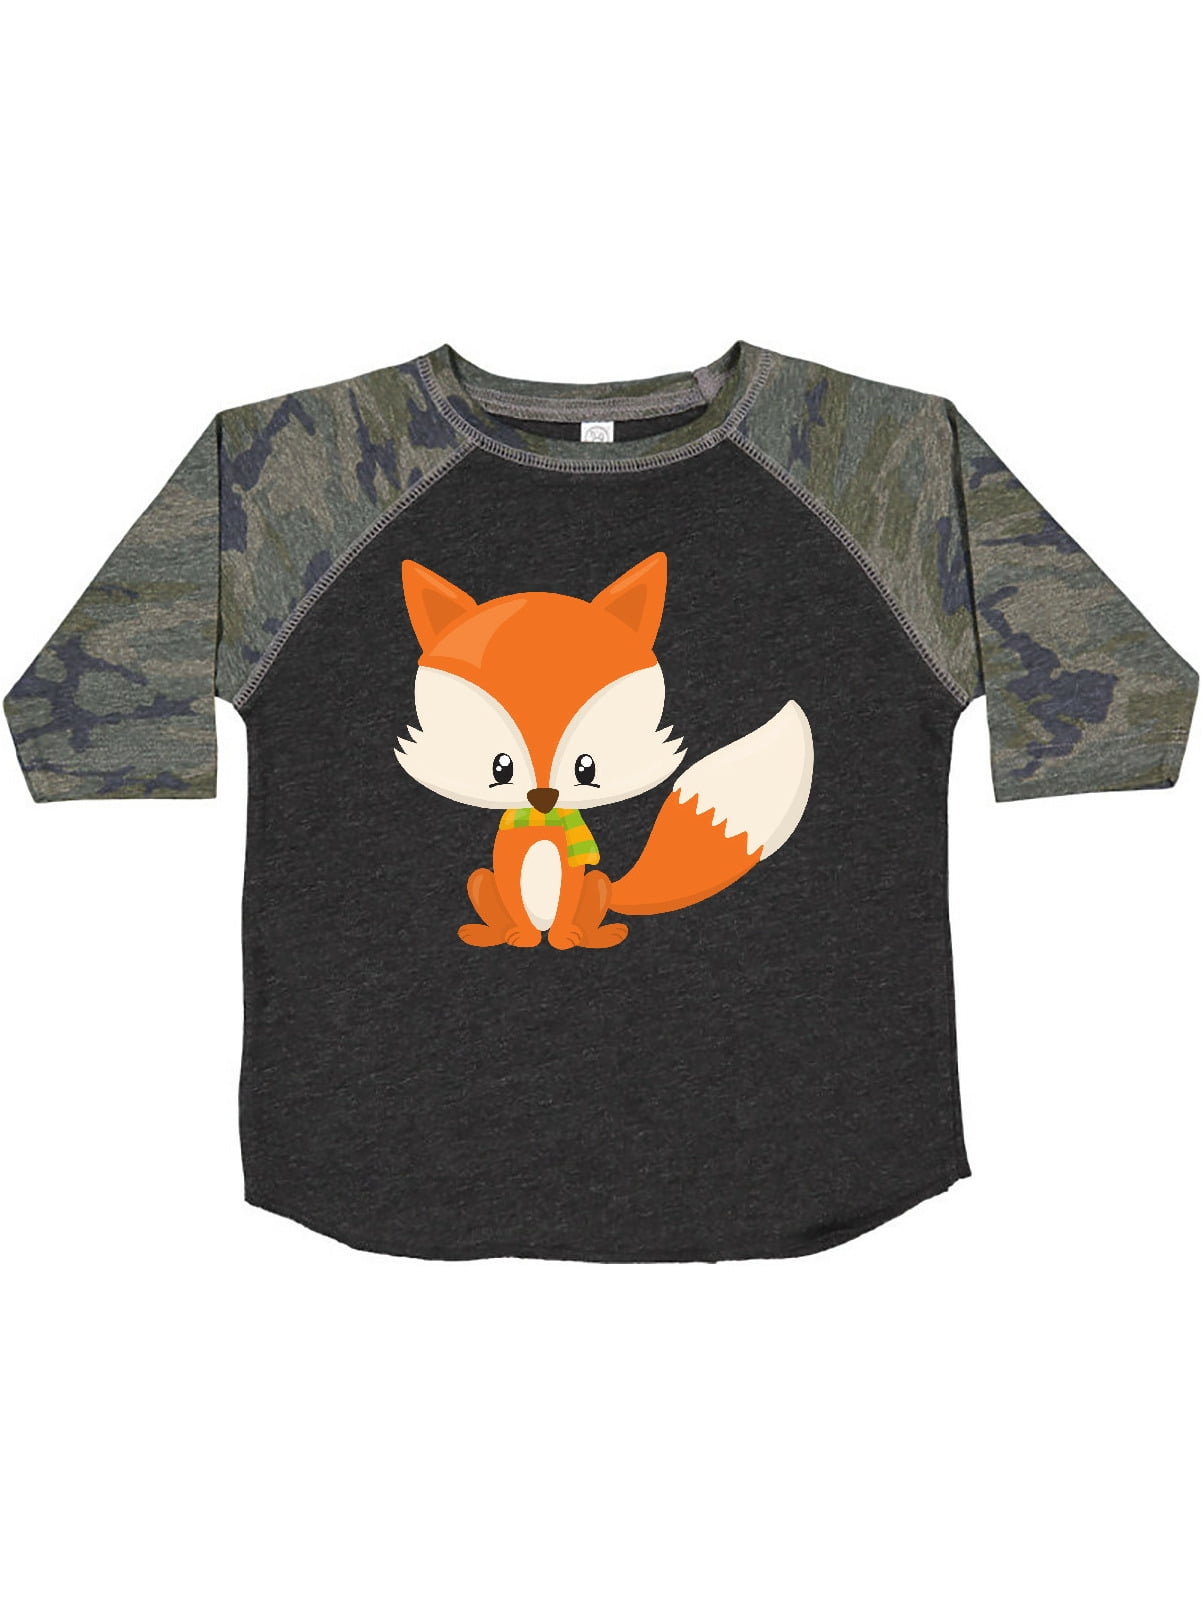 Zero Fox Given Baby T-Shirt Little Baby Cotton T Shirts Cartoon Tops for 6M-2T Baby 